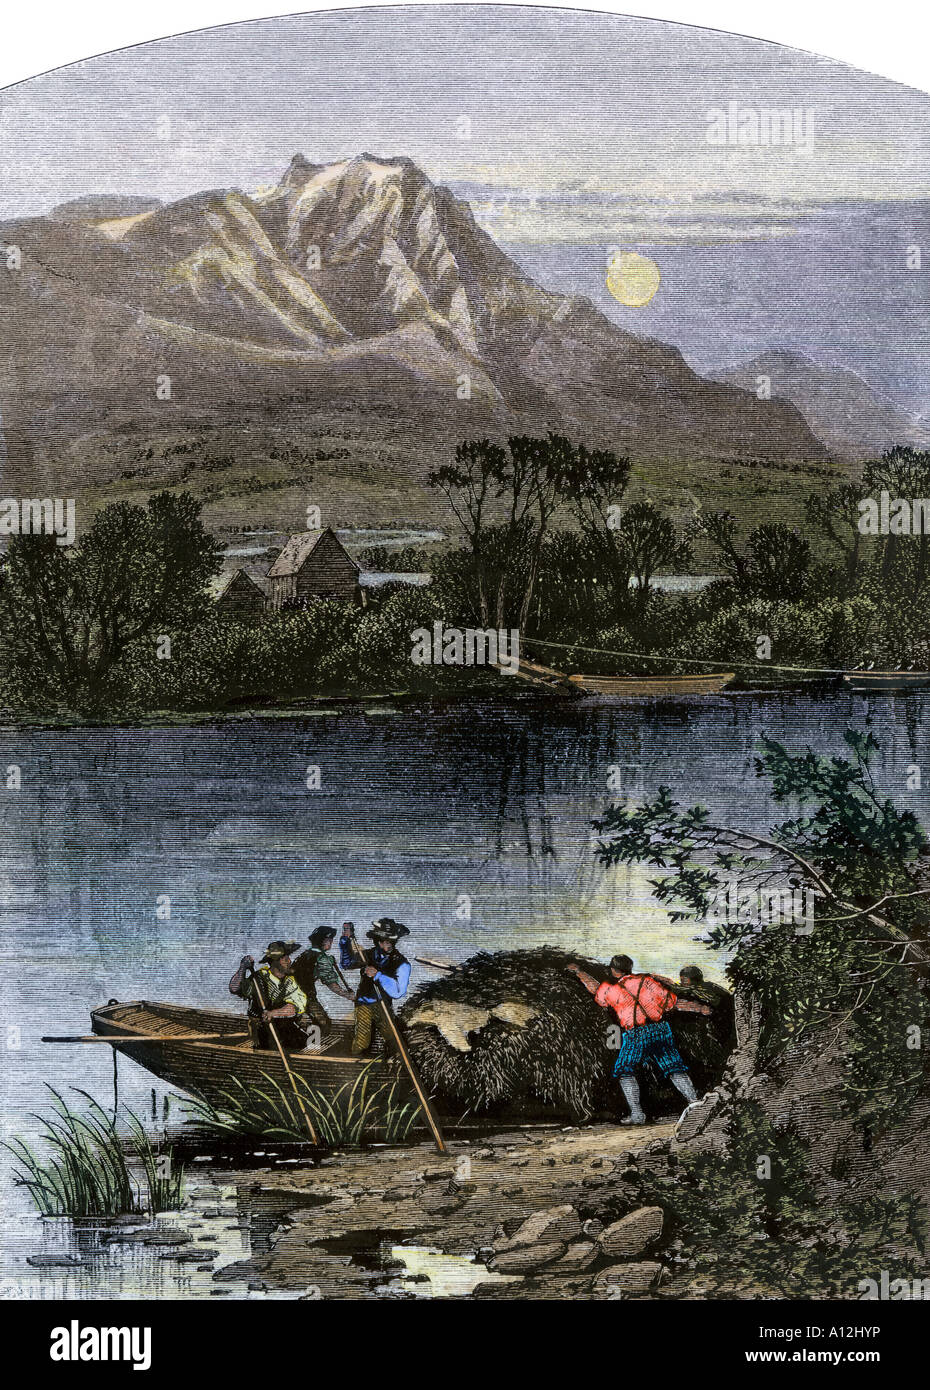 Fur traders boat piled high with pelts on the Bear River in Utah Territory 1800s. Hand-colored woodcut Stock Photo